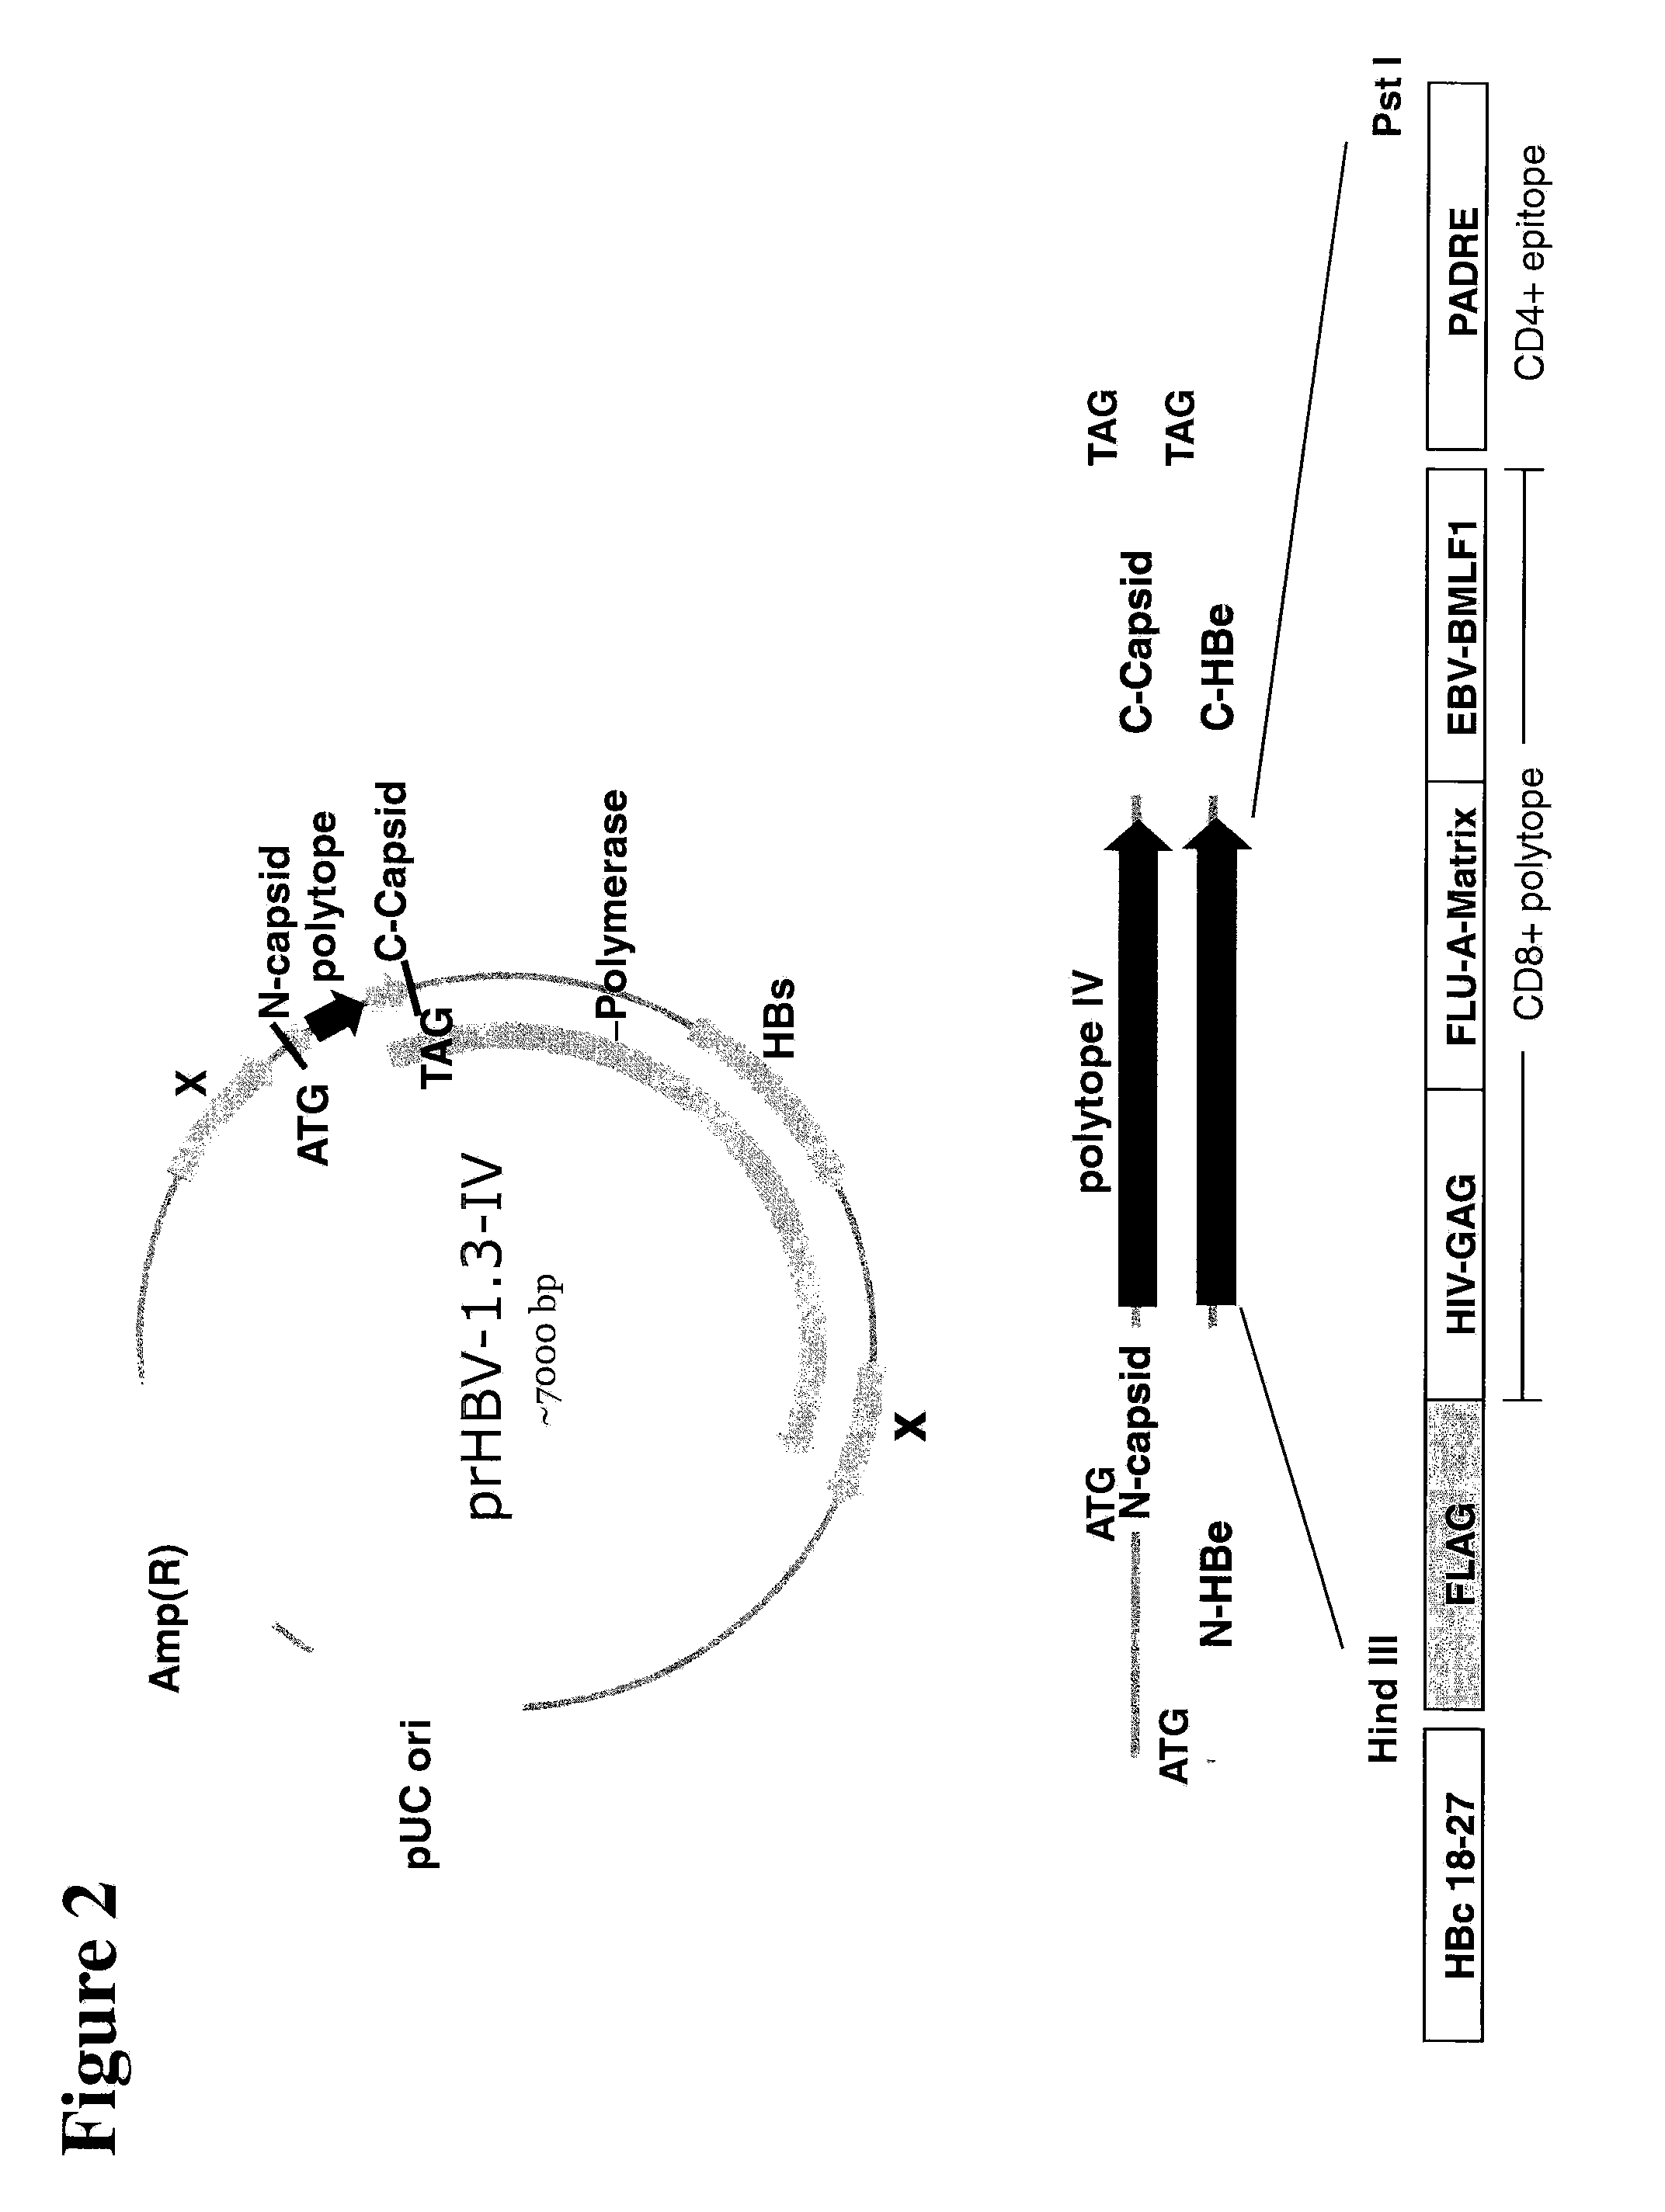 Polynucleotides allowing the expression and secretion of recombinant pseudo-virus containing foreign epitopes, their production, and use